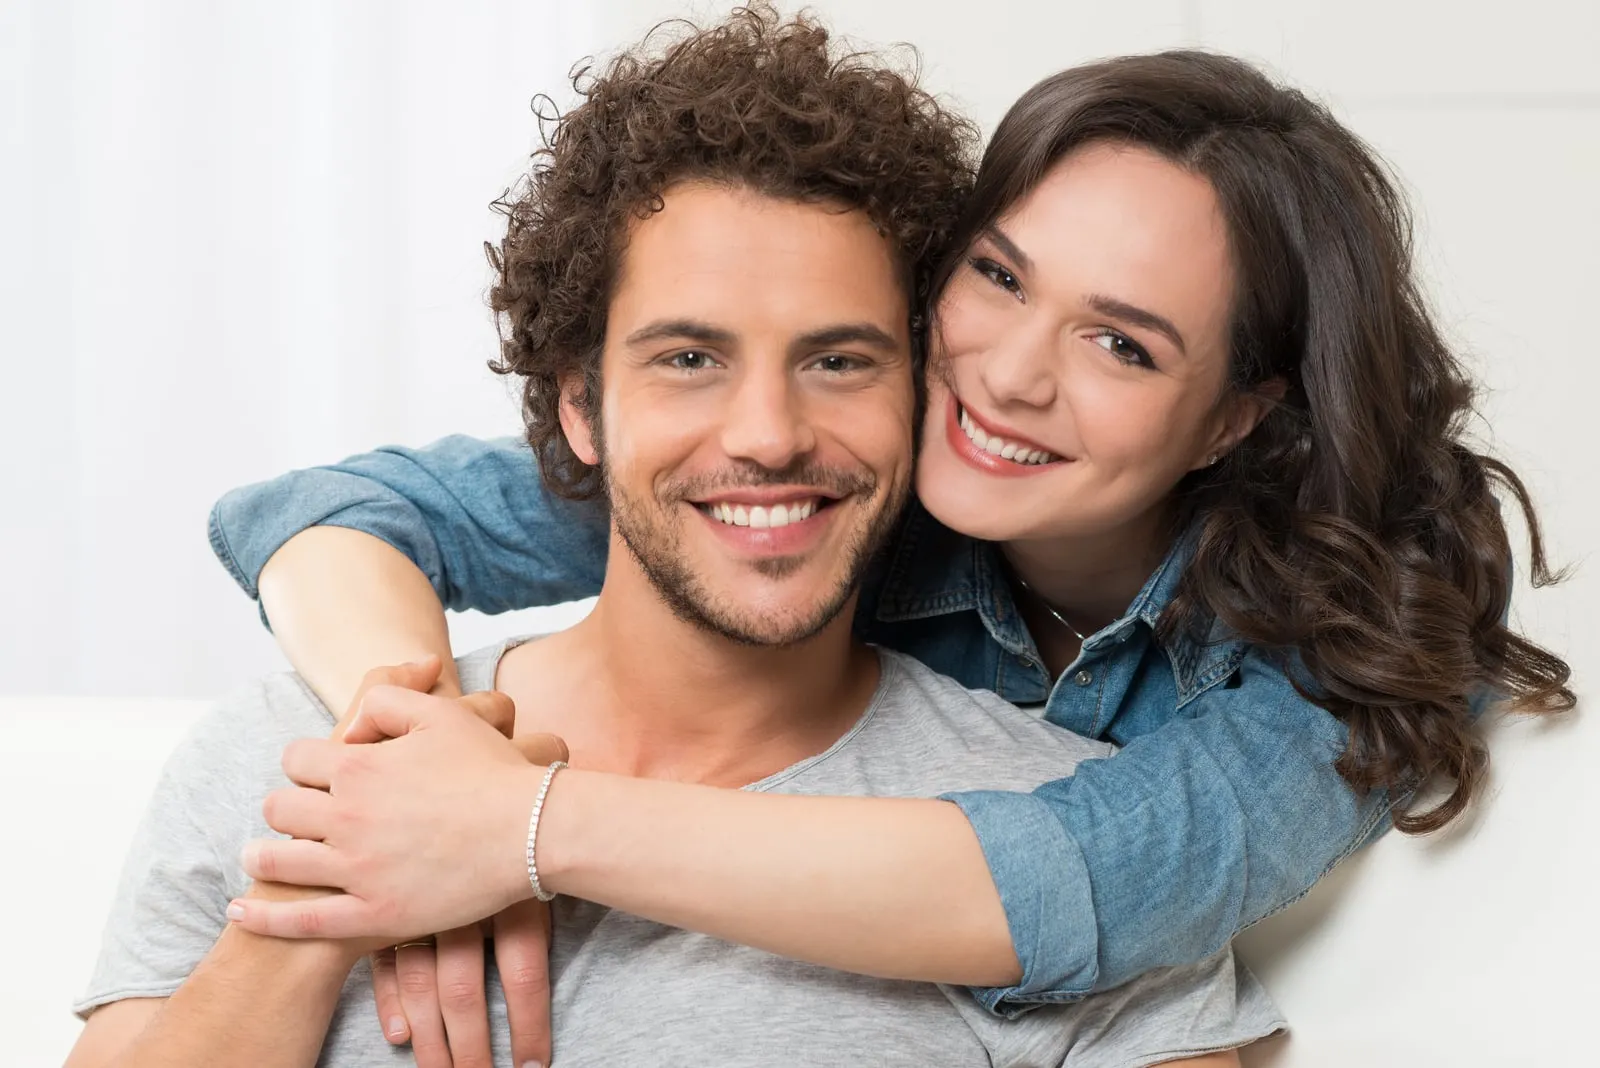 portrait of young smiling man and woman